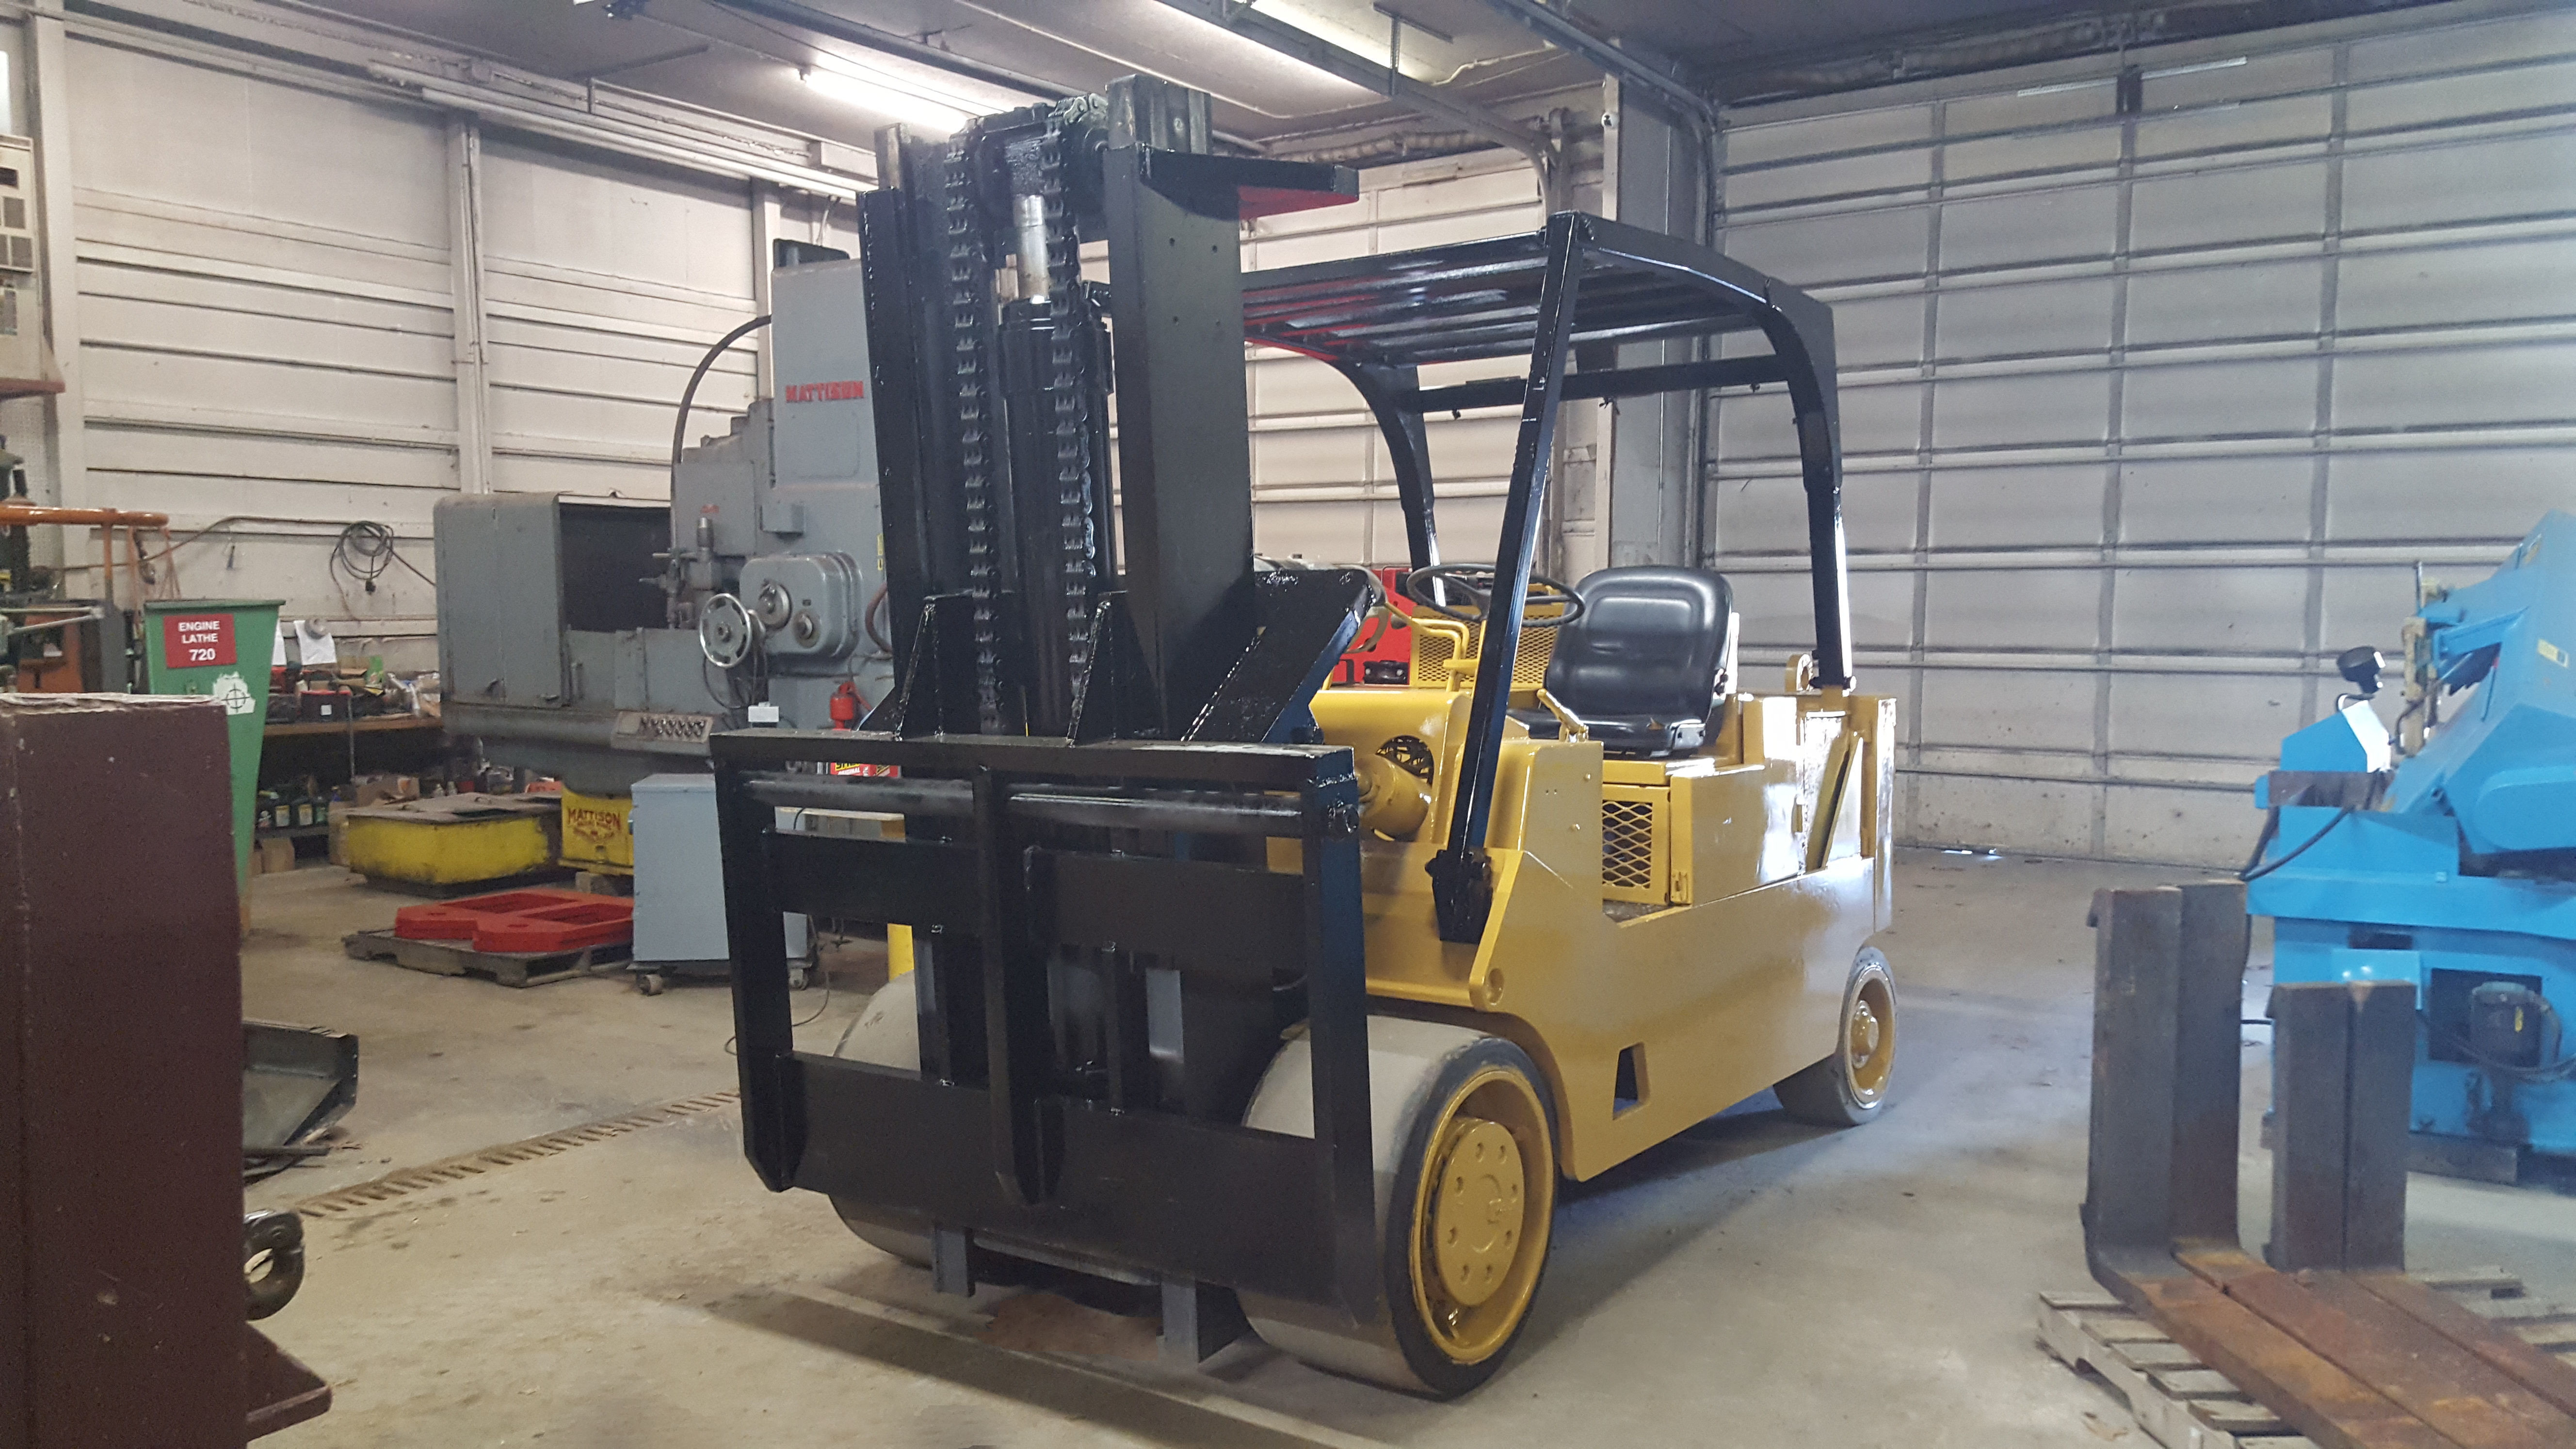 30,000lb. Capacity Caterpillar/Royal T-300 Forklift For Sale